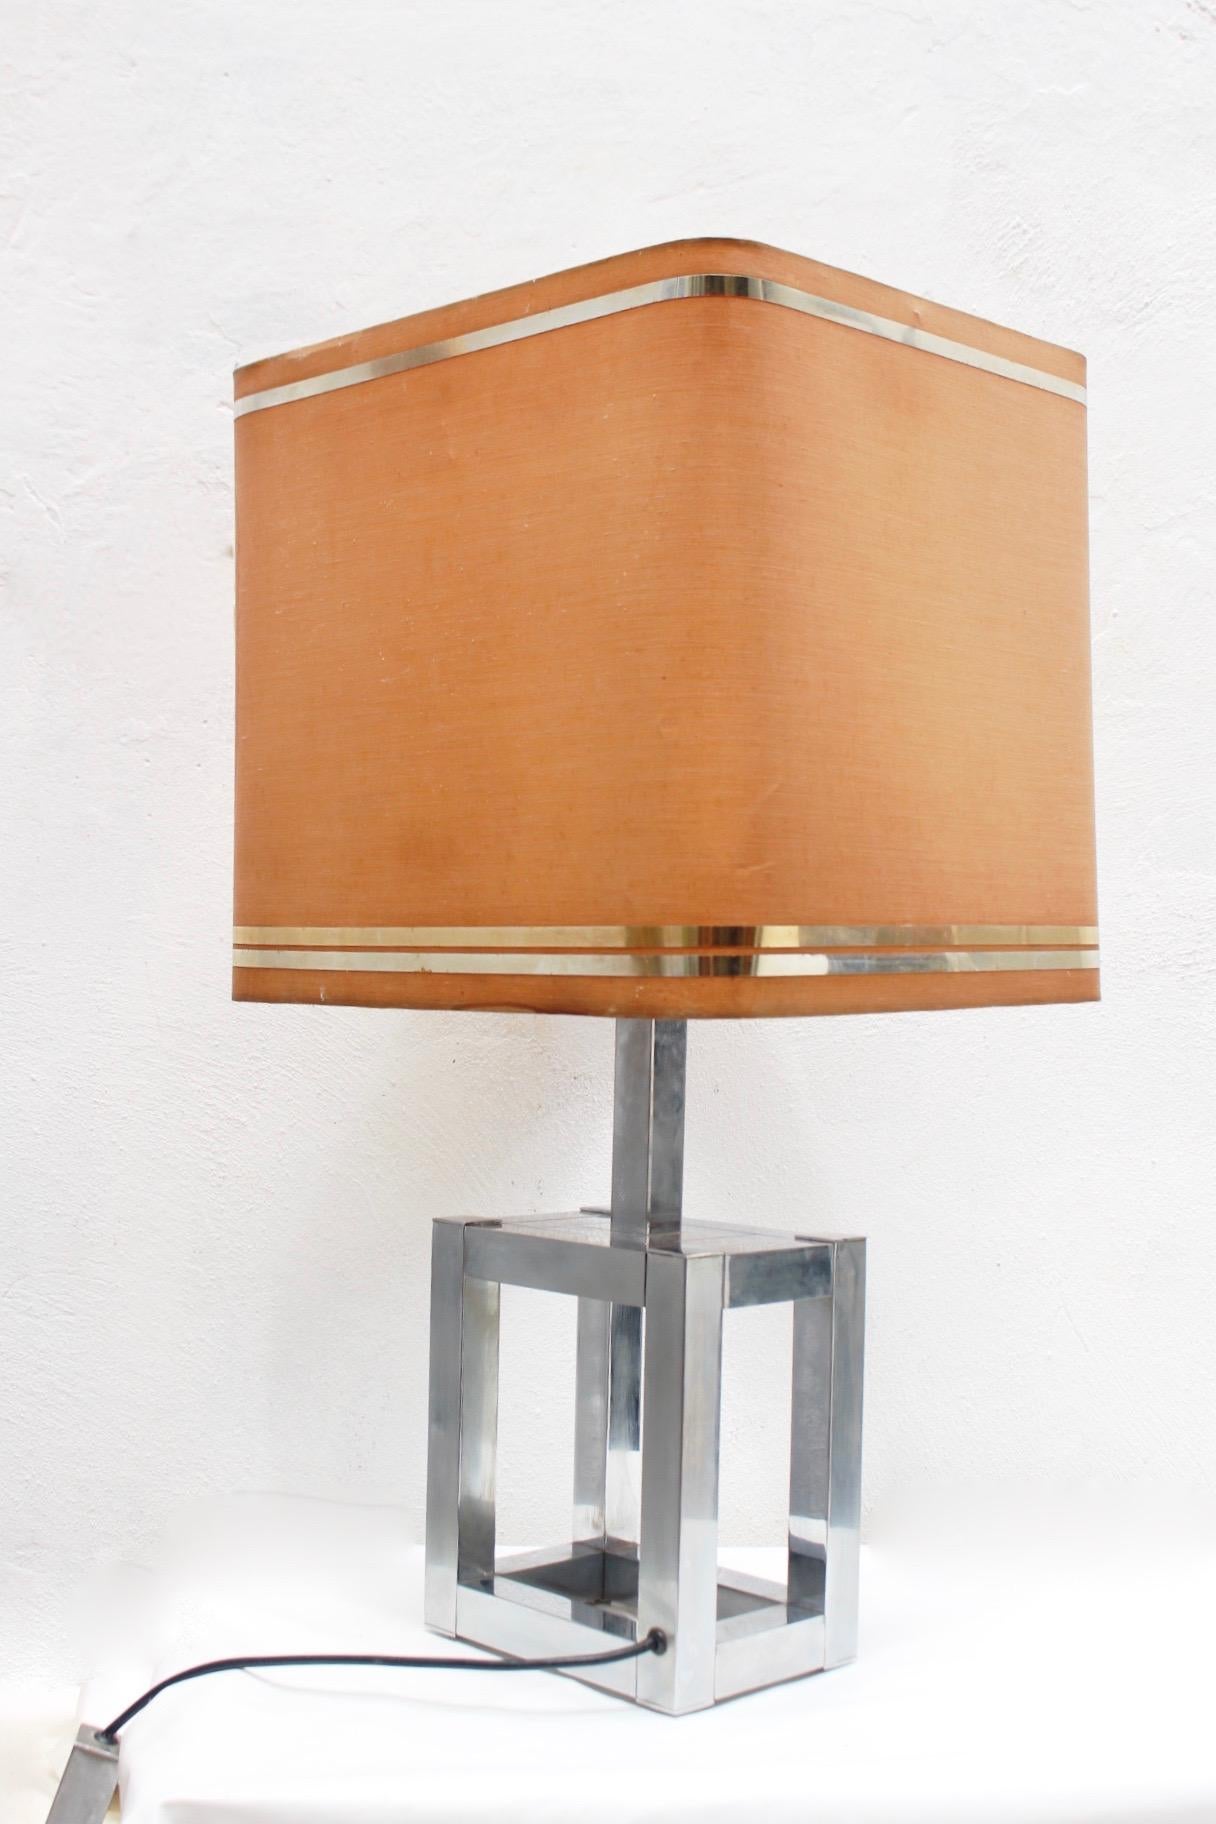 Italian Midcentury Willy Rizzo Sculptural Cubic Sculptural Table Lamp for Lumica, 1970s For Sale